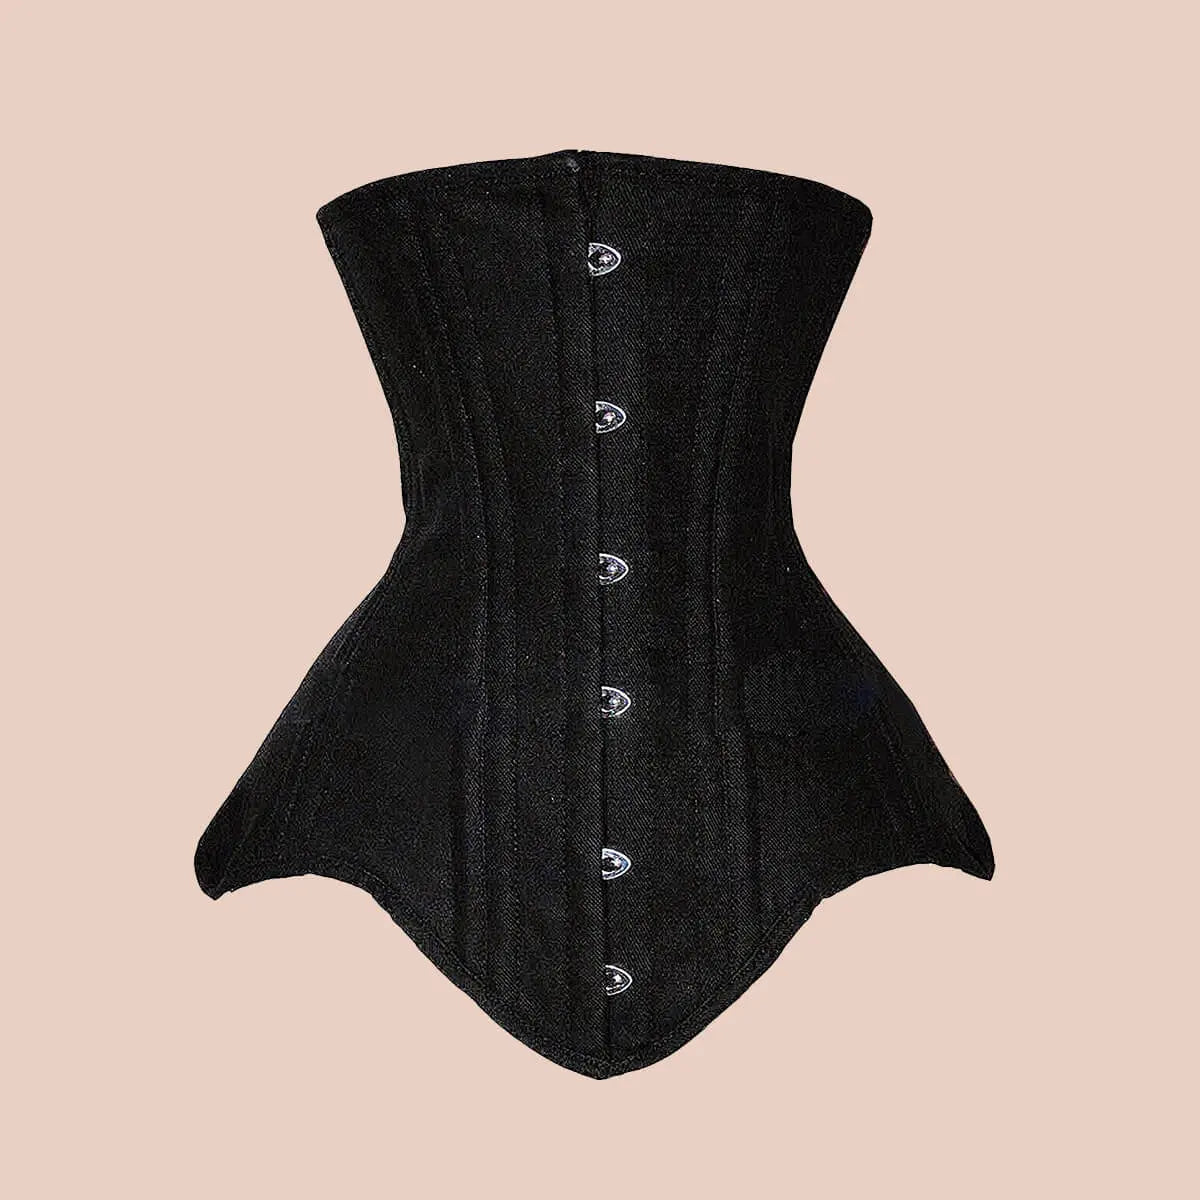 Shaperx Corset for Women - Up to 65% off